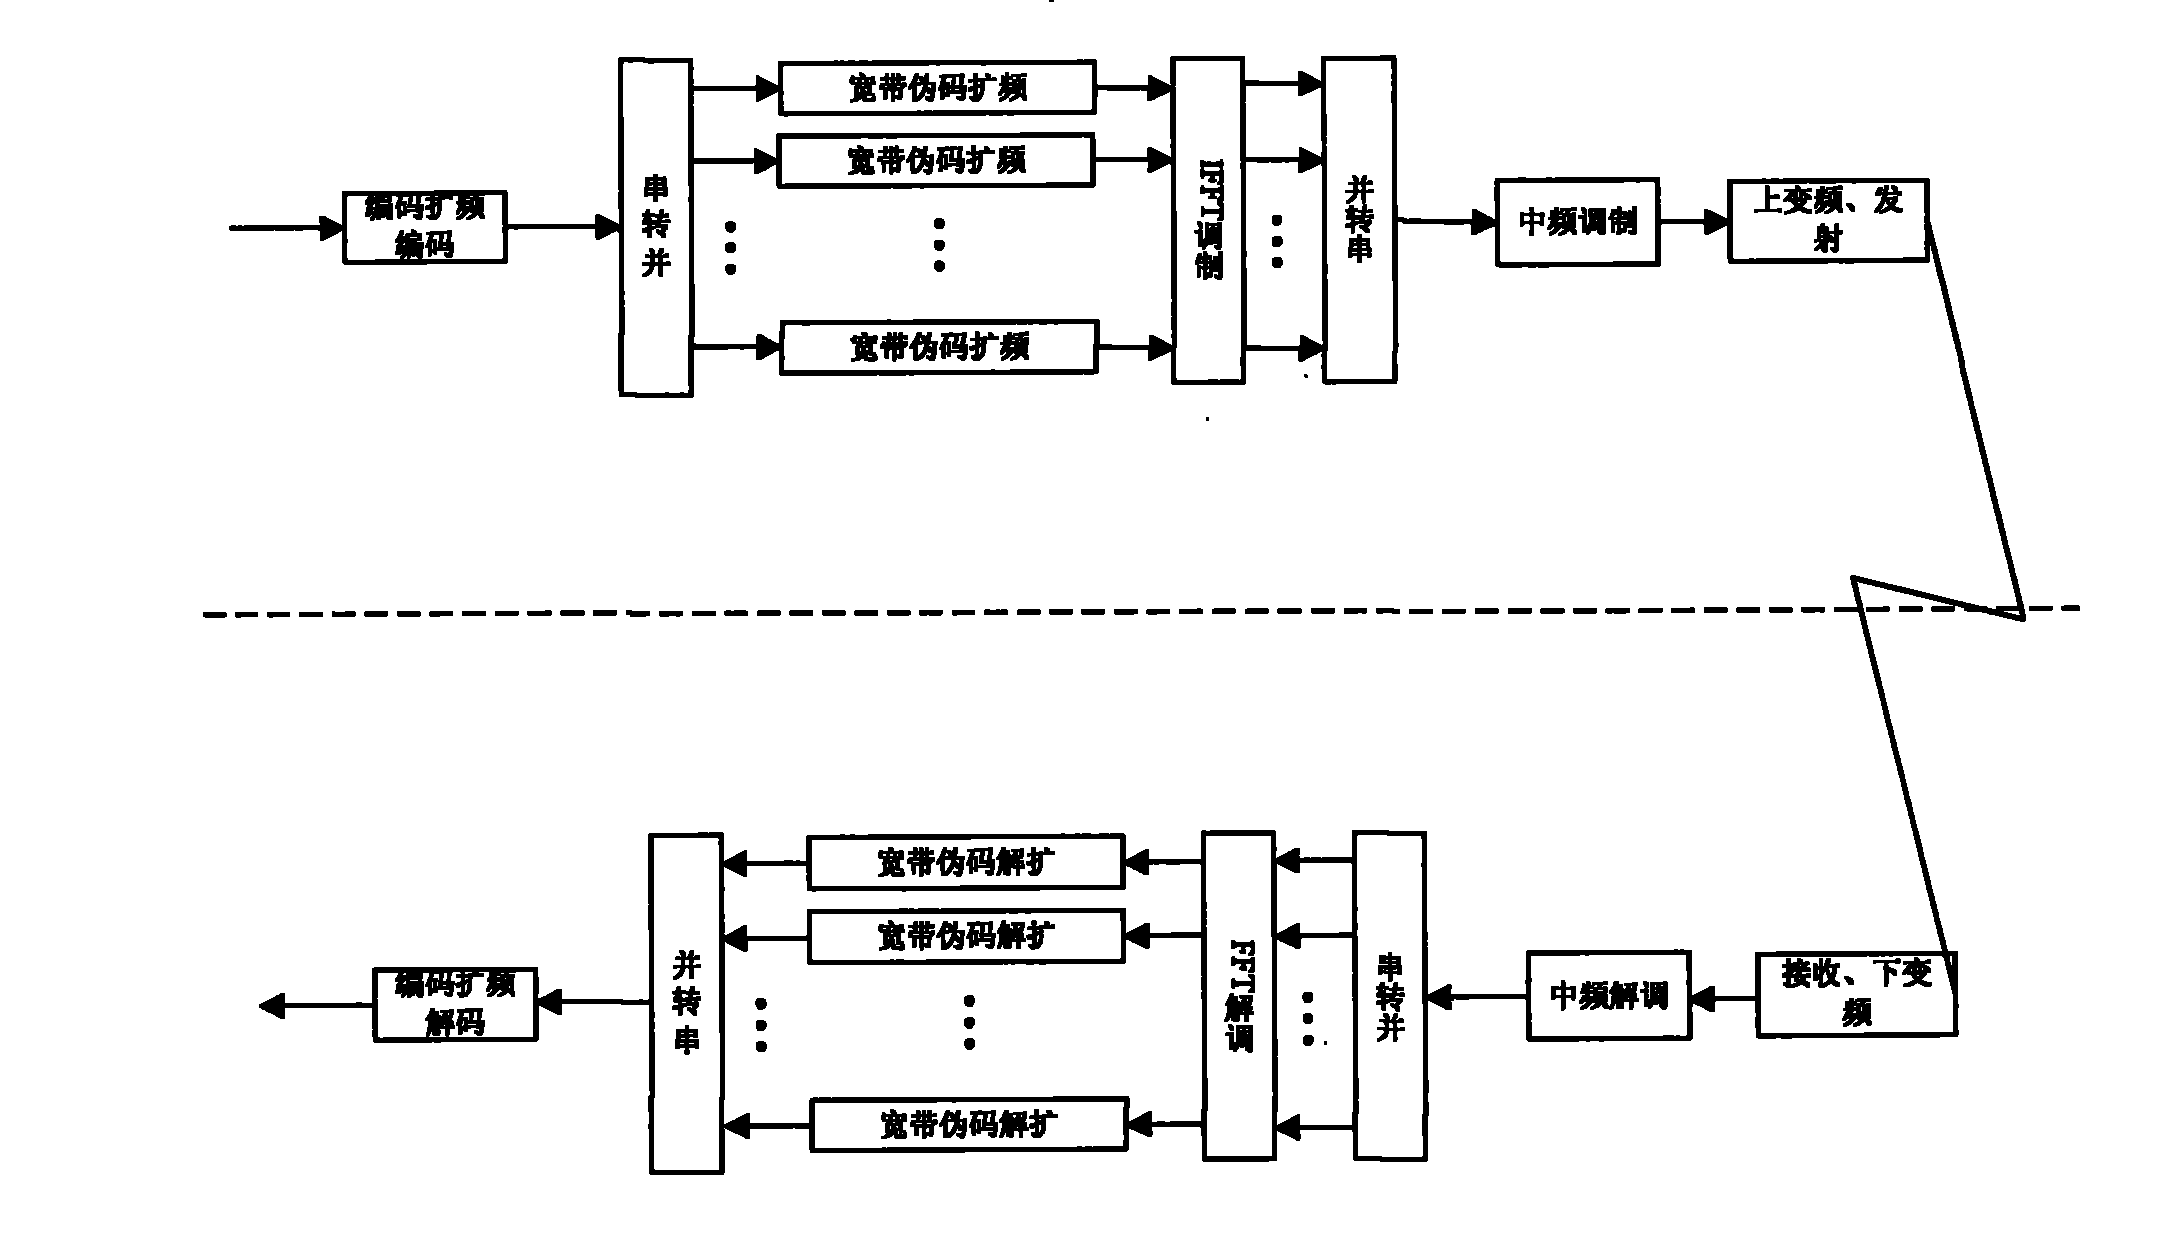 Spectrum-spread type PDH microwave communication system and method